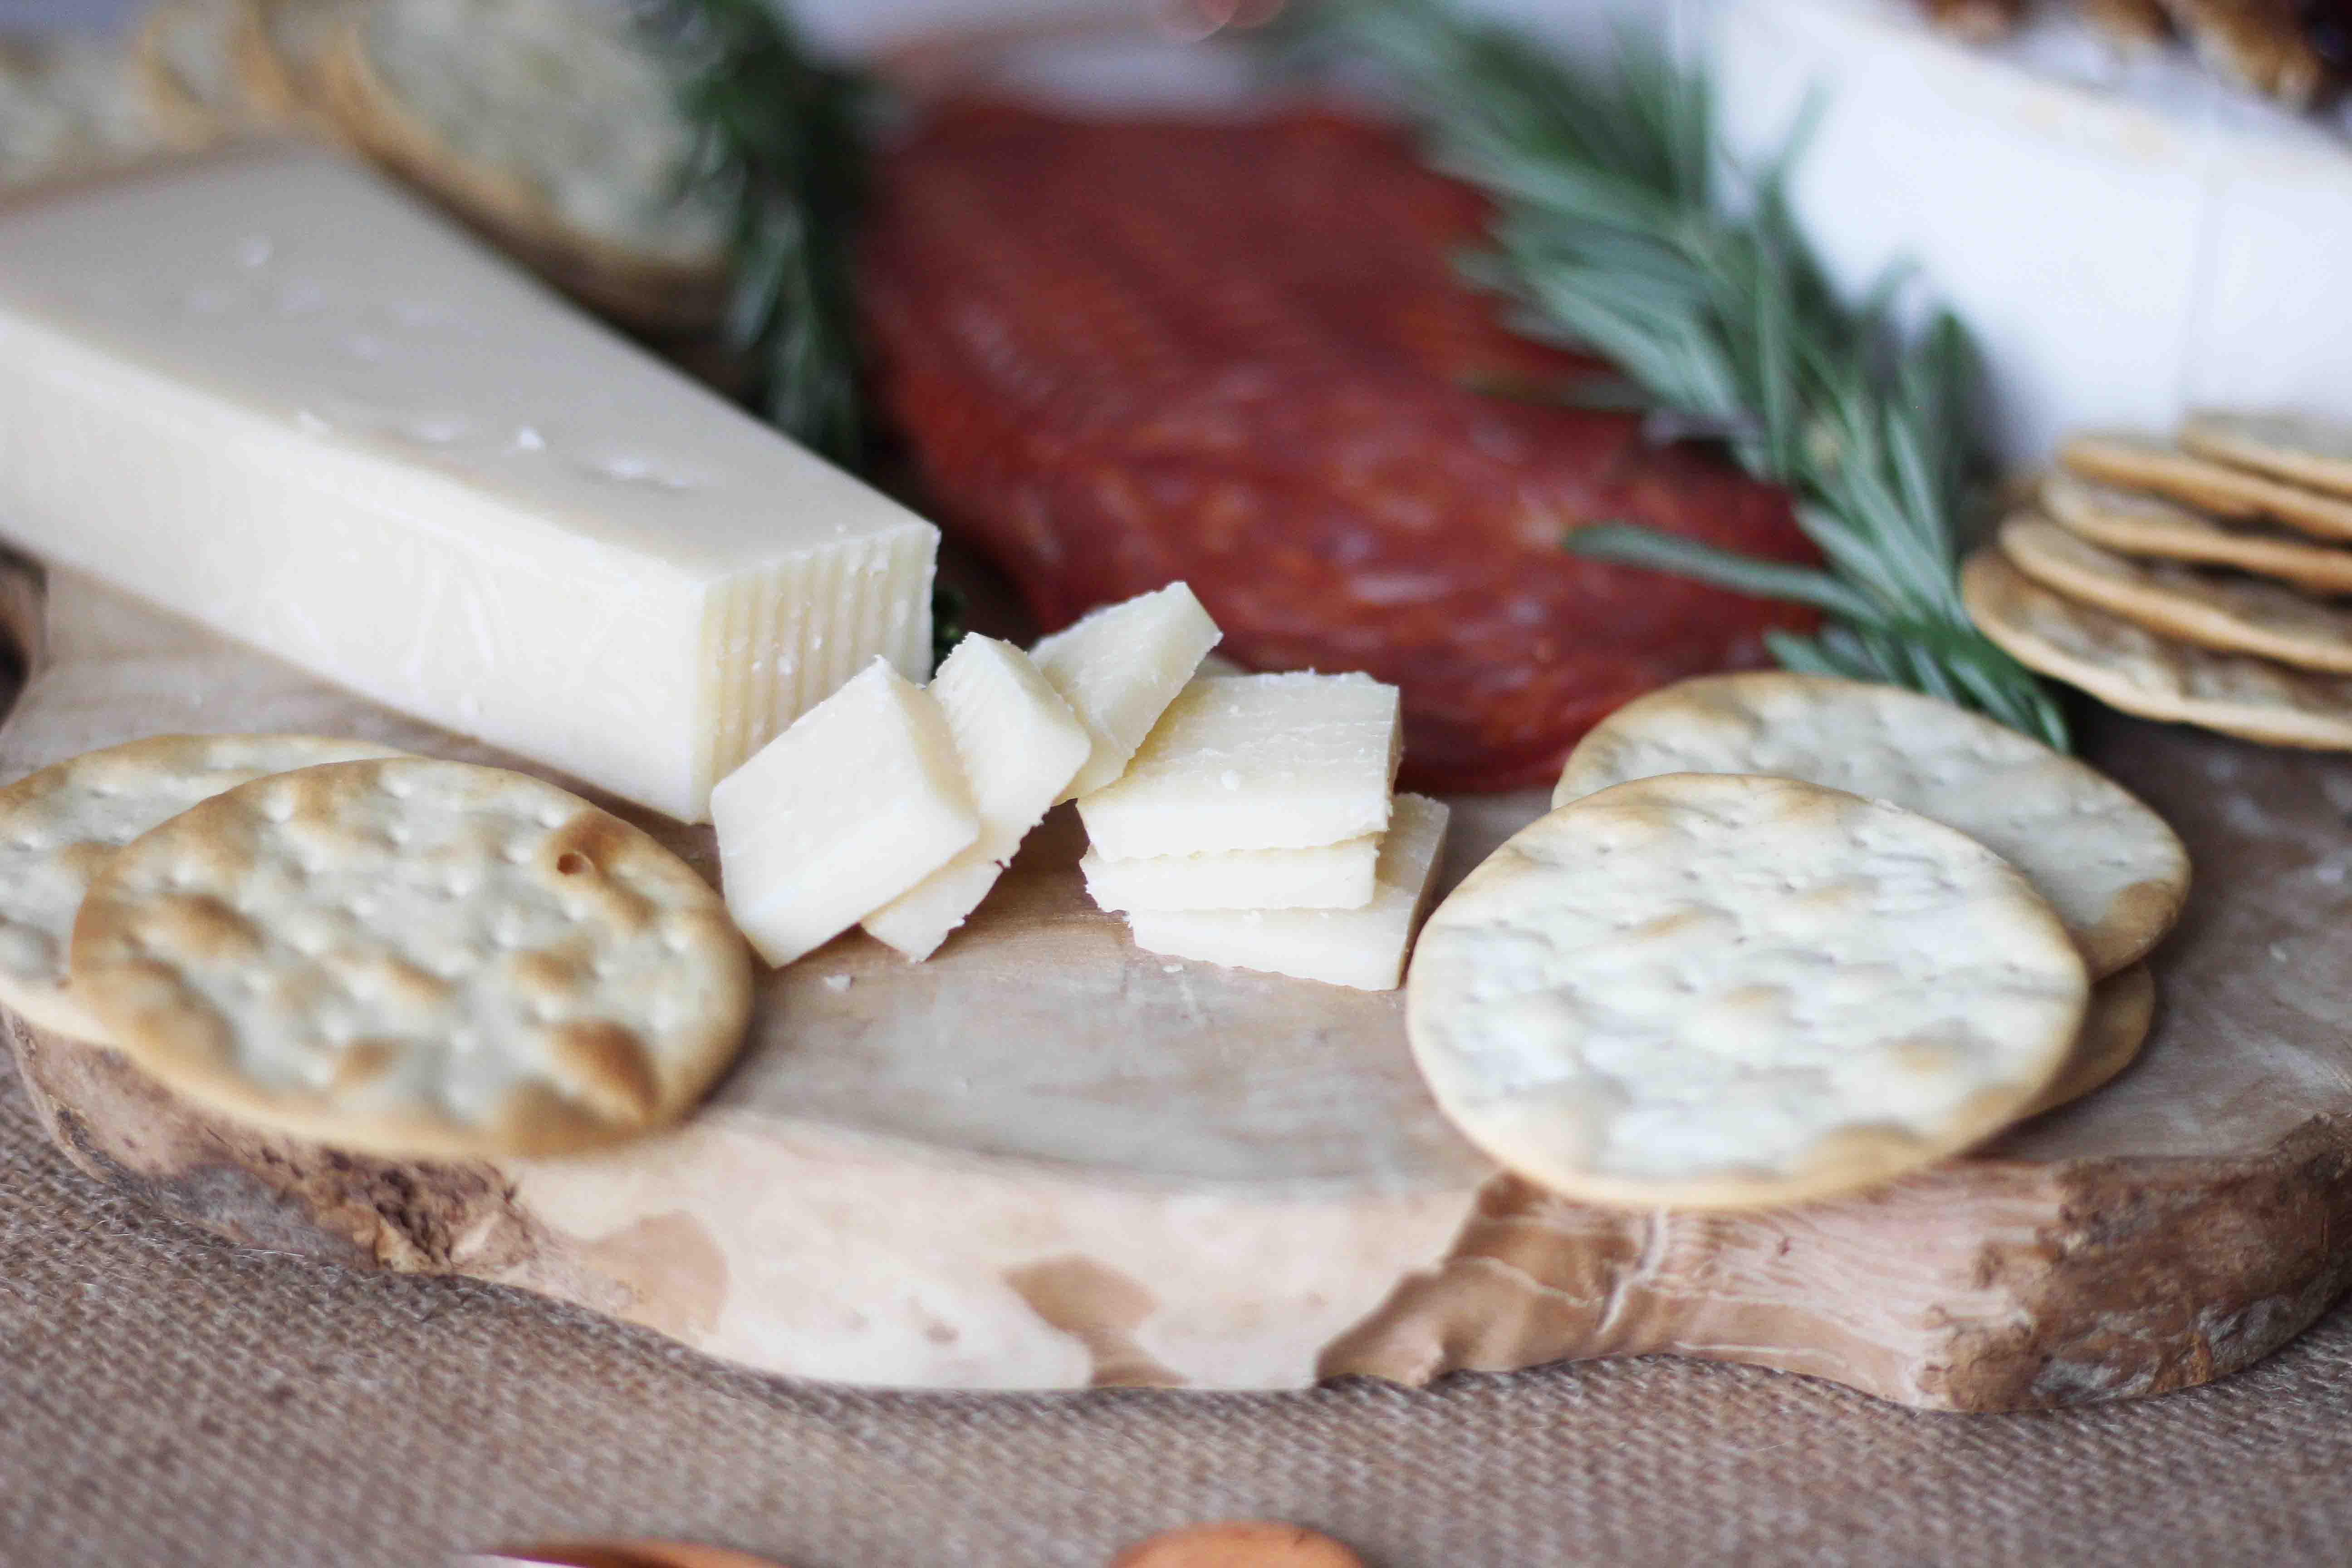 How to create the perfect holiday cheeseboard with sterling wines sparkleshinylove